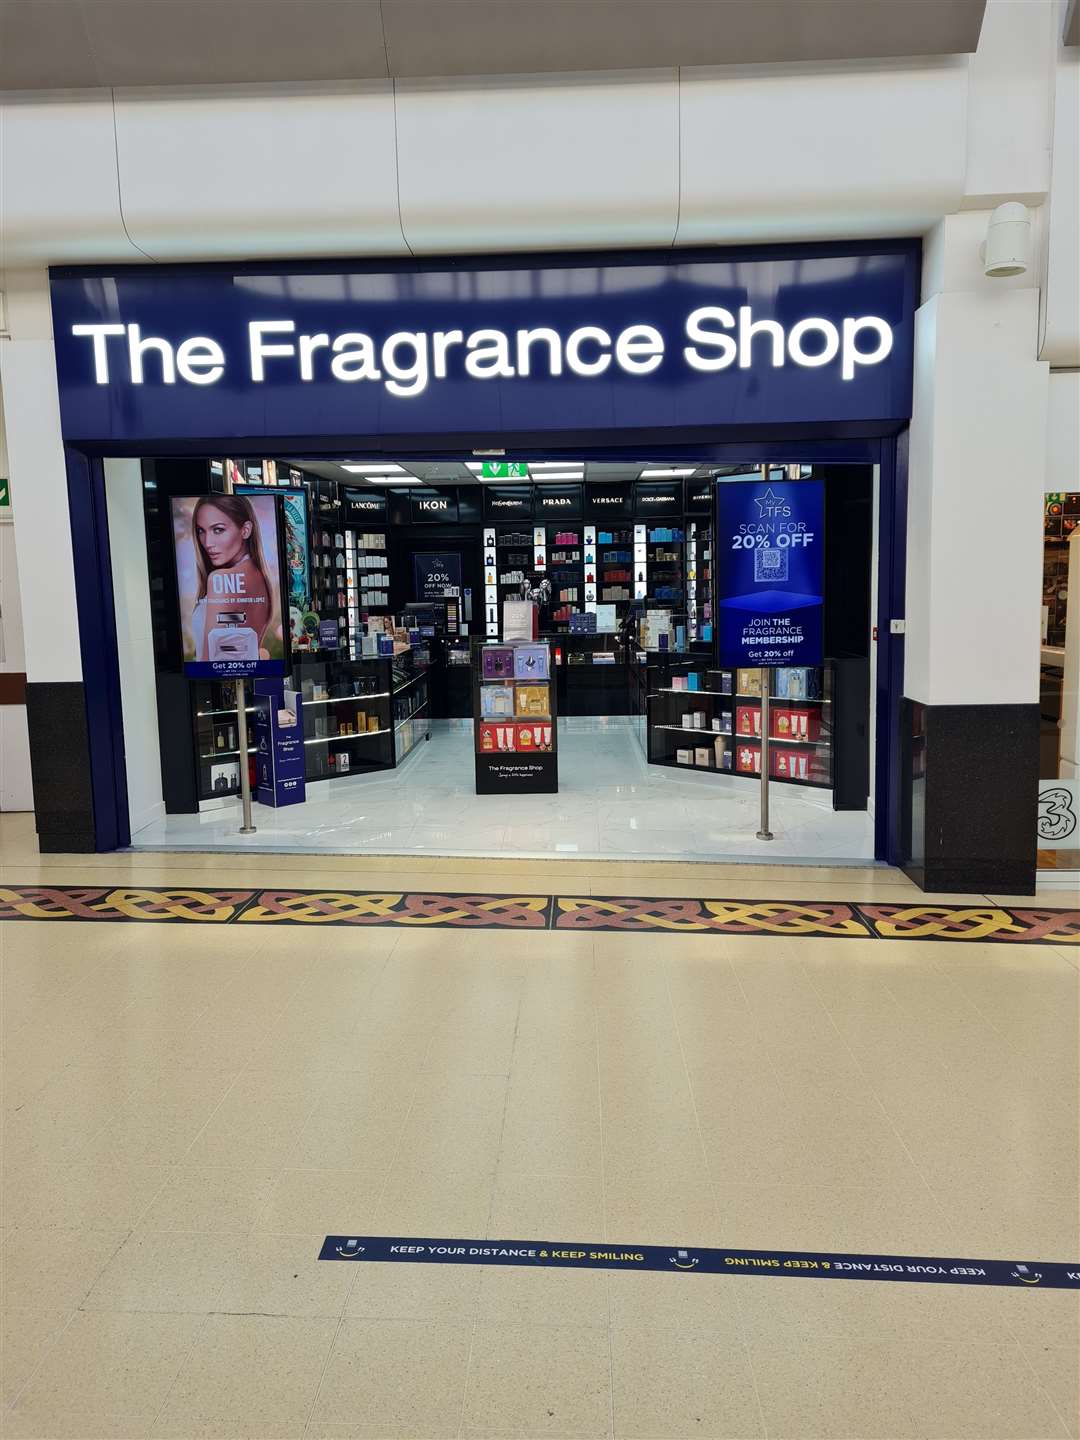 The Fragrance Shop will celebrate the official opening of its new store in the Eastgate shopping center in Inverness on Saturday.